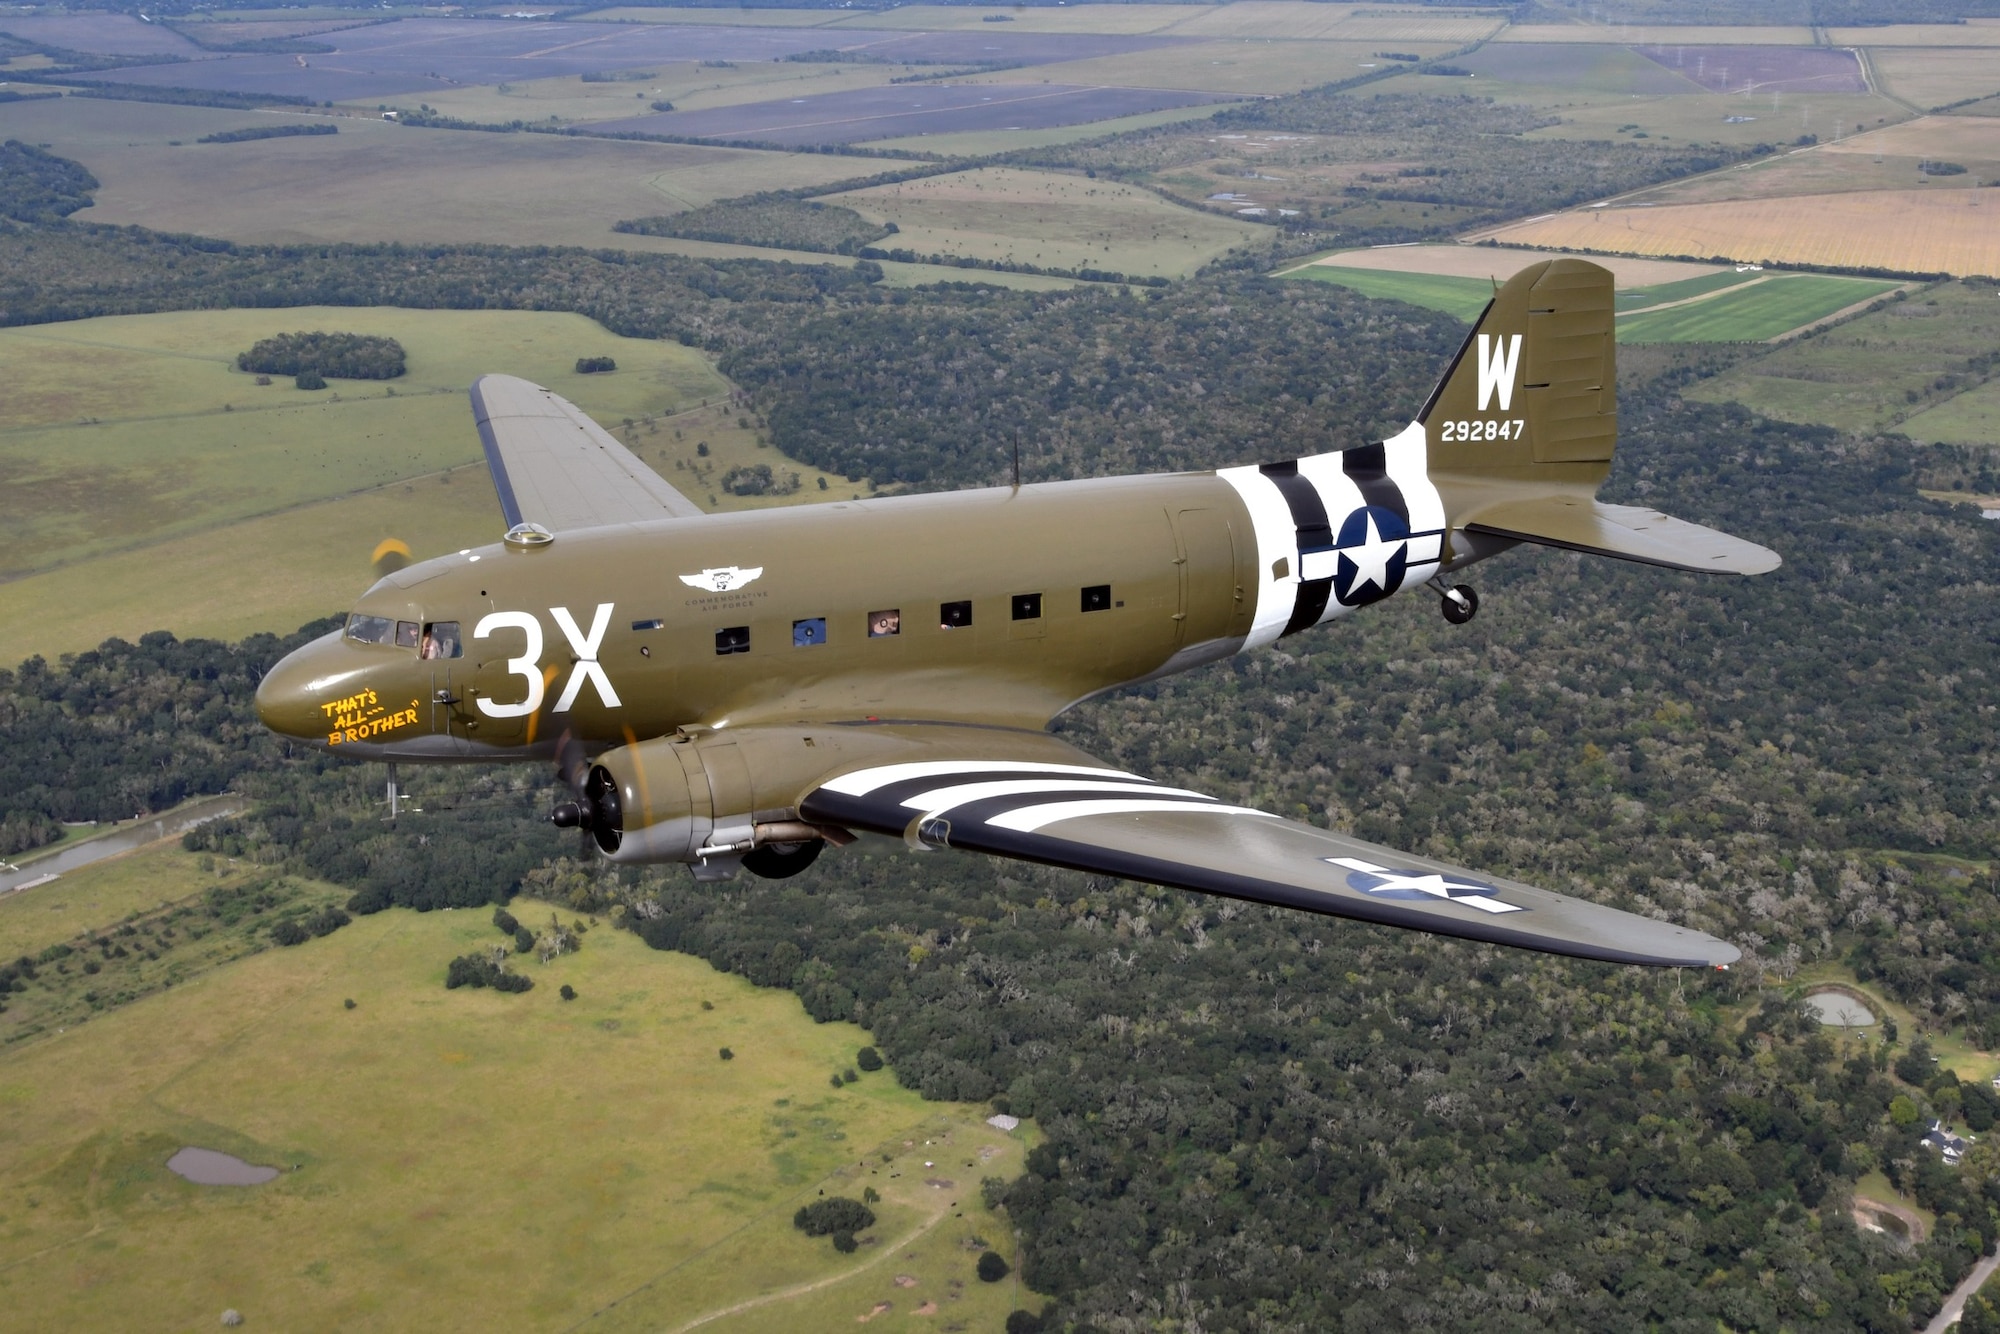 Aerial picture of the C-47 "That's All, Brother" flying.